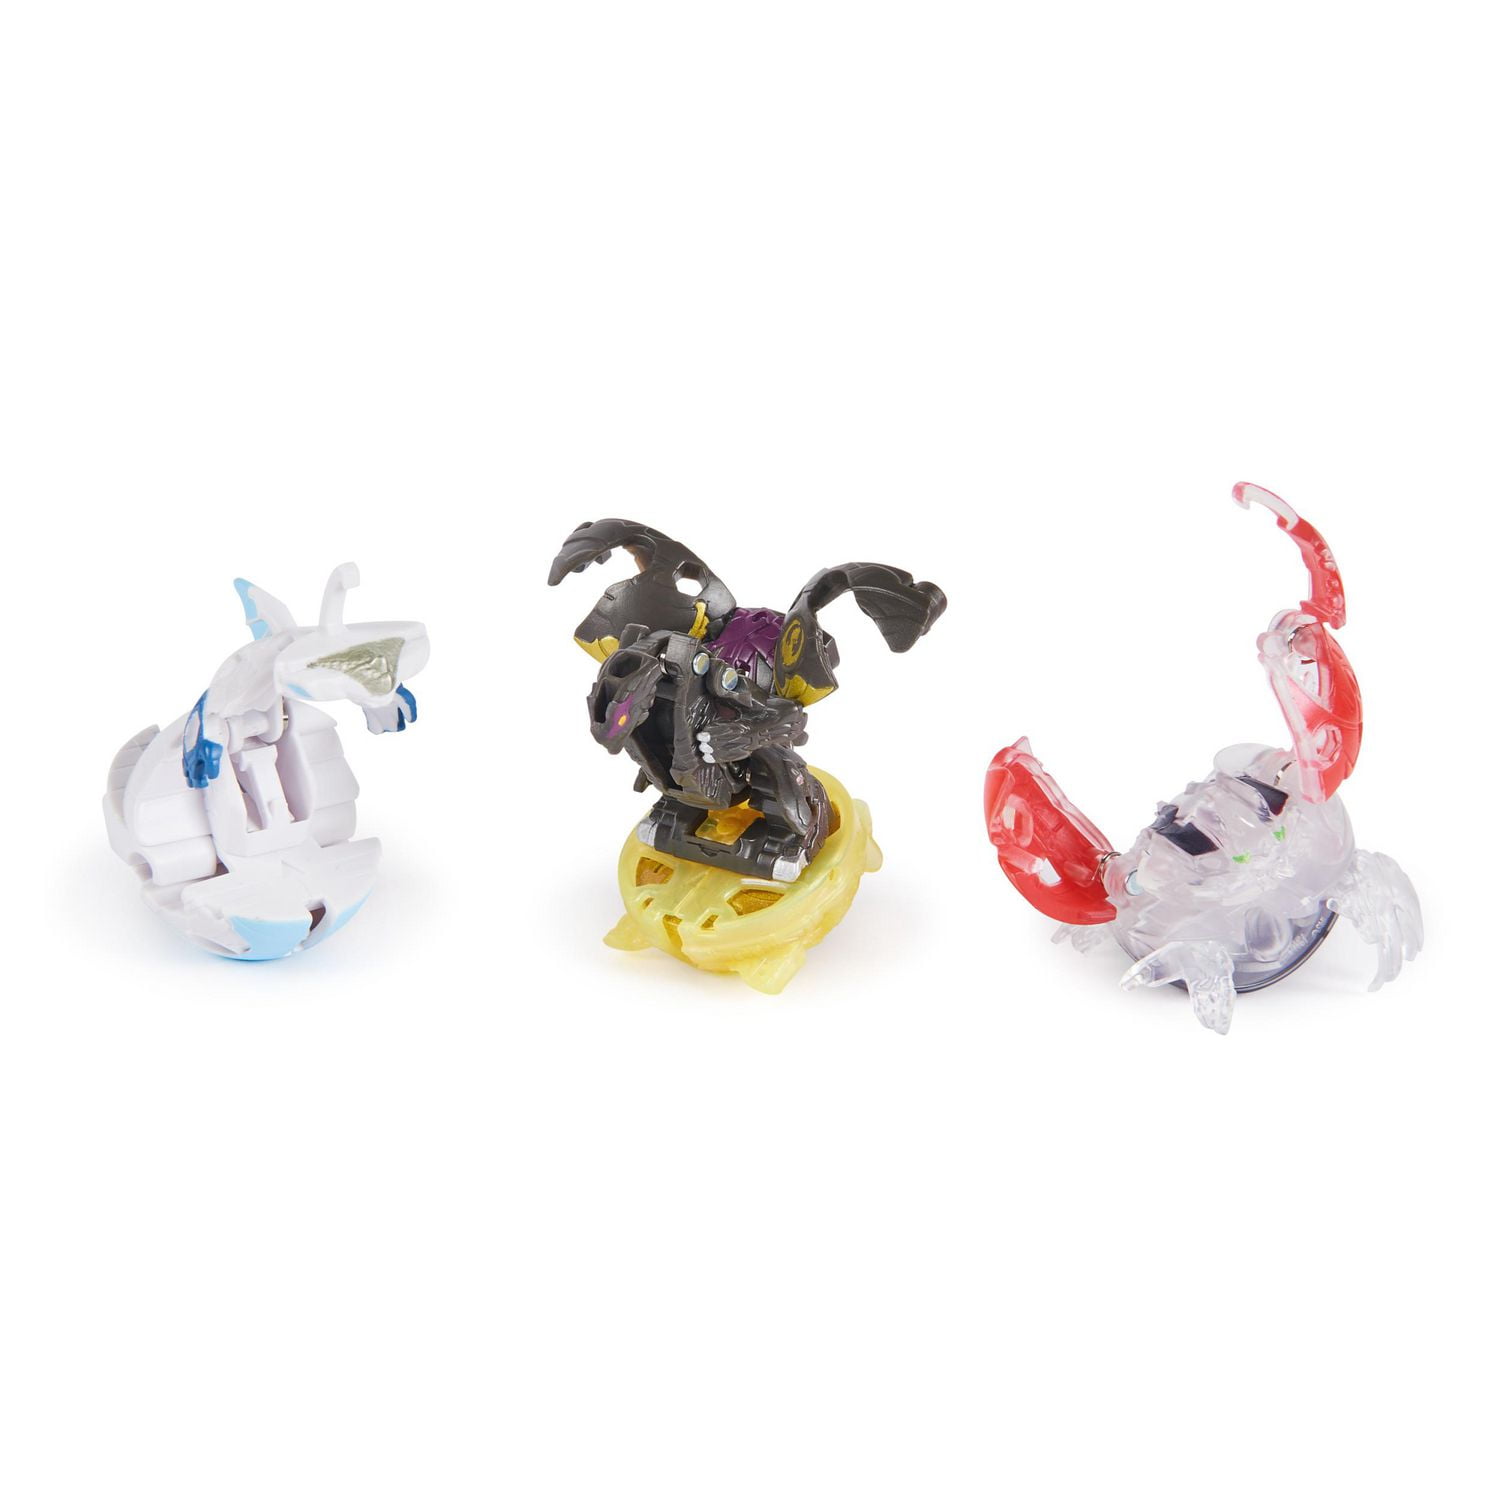 Bakugan Starter 3-Pack, Special Attack Bruiser, Dragonoids, Hammerhead and  Nillious, Customizable Spinning Action Figures and Trading Cards